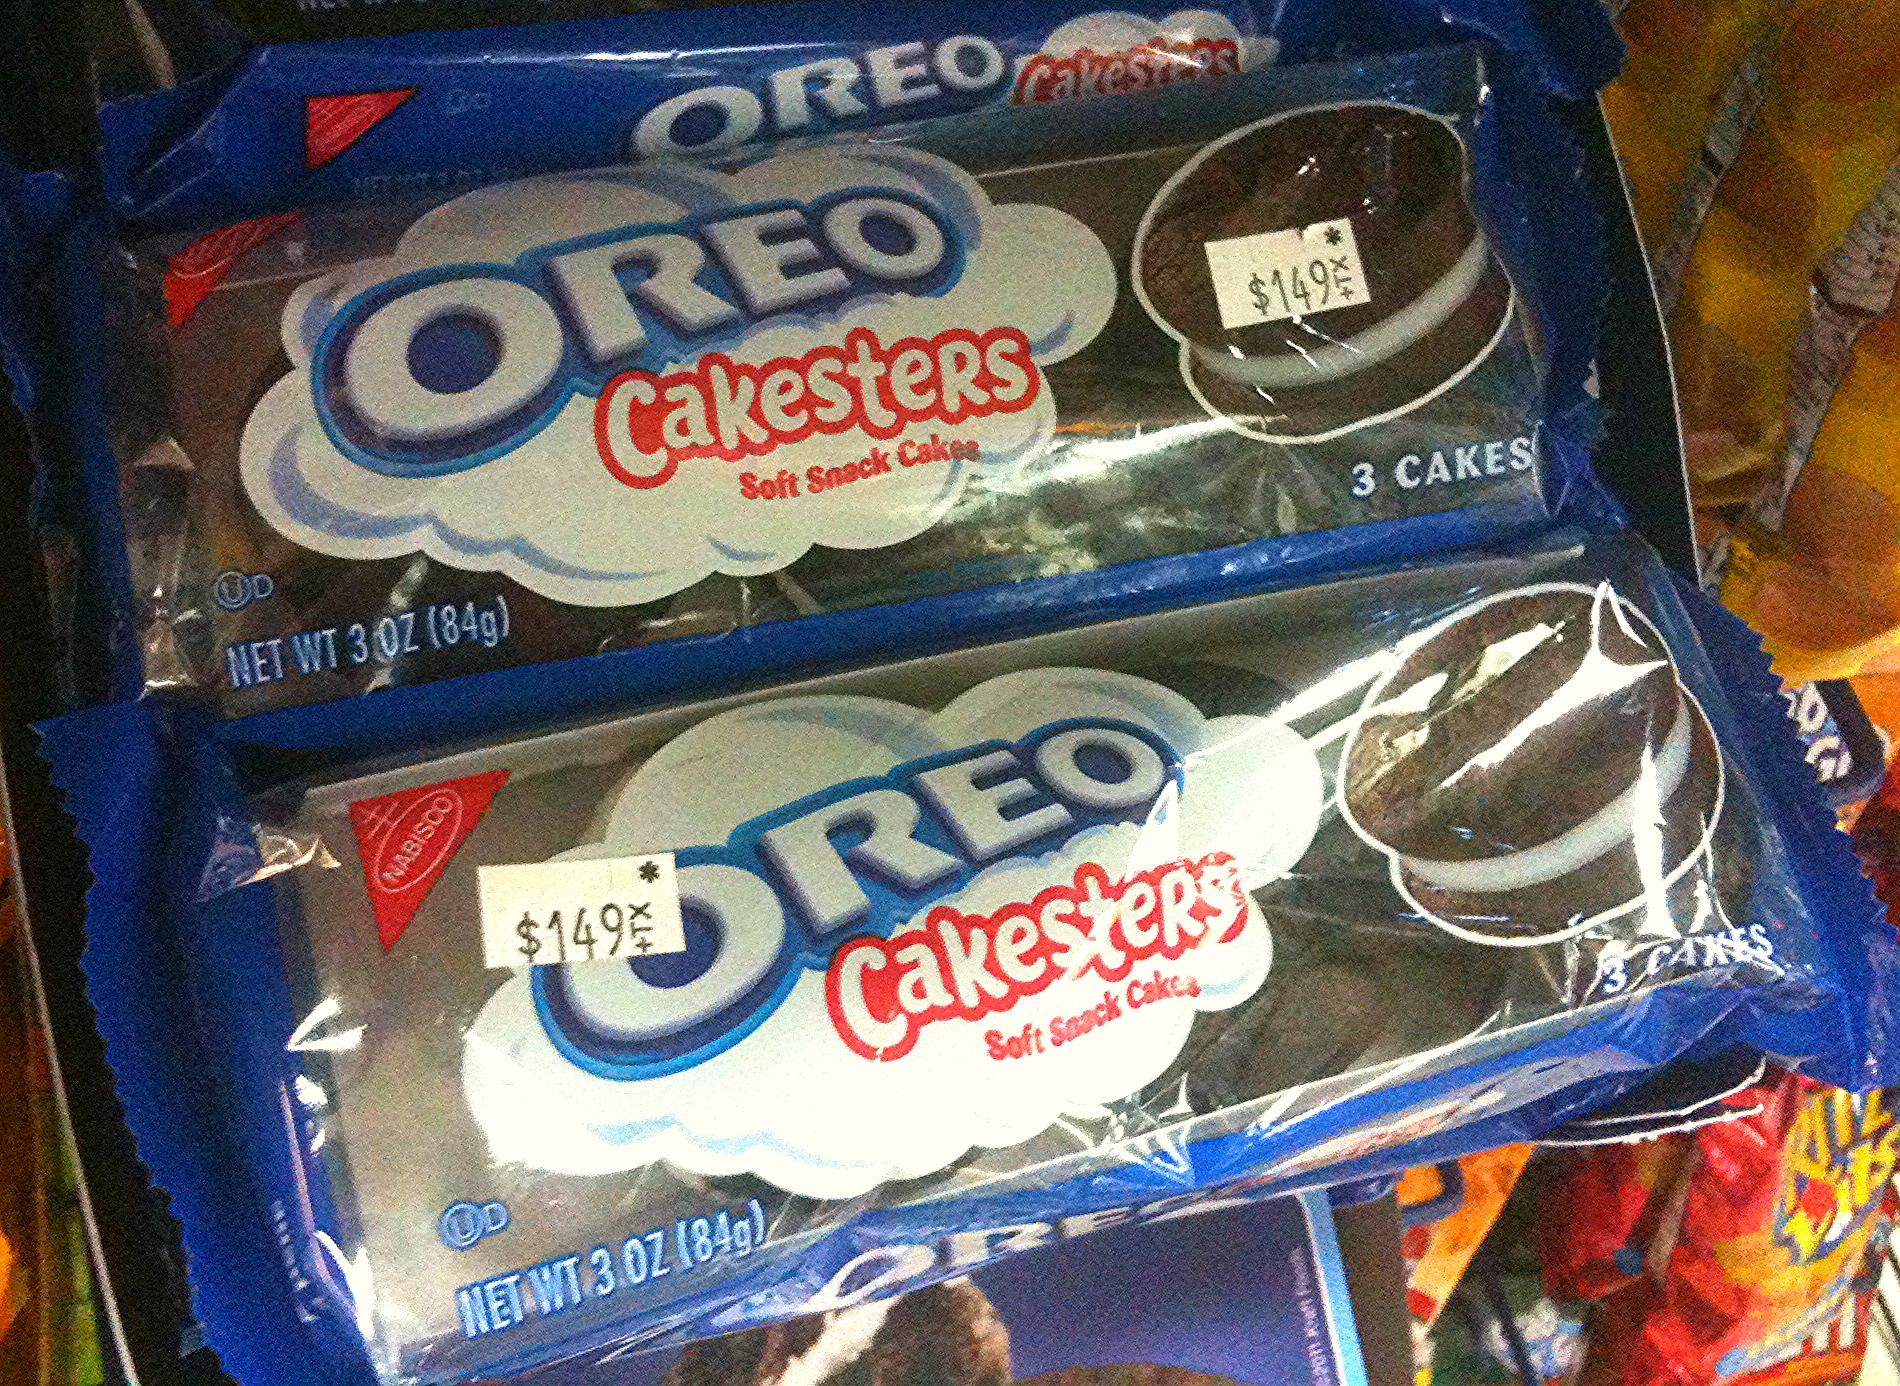 some packages of oreo cookies and cake pops on a shelf